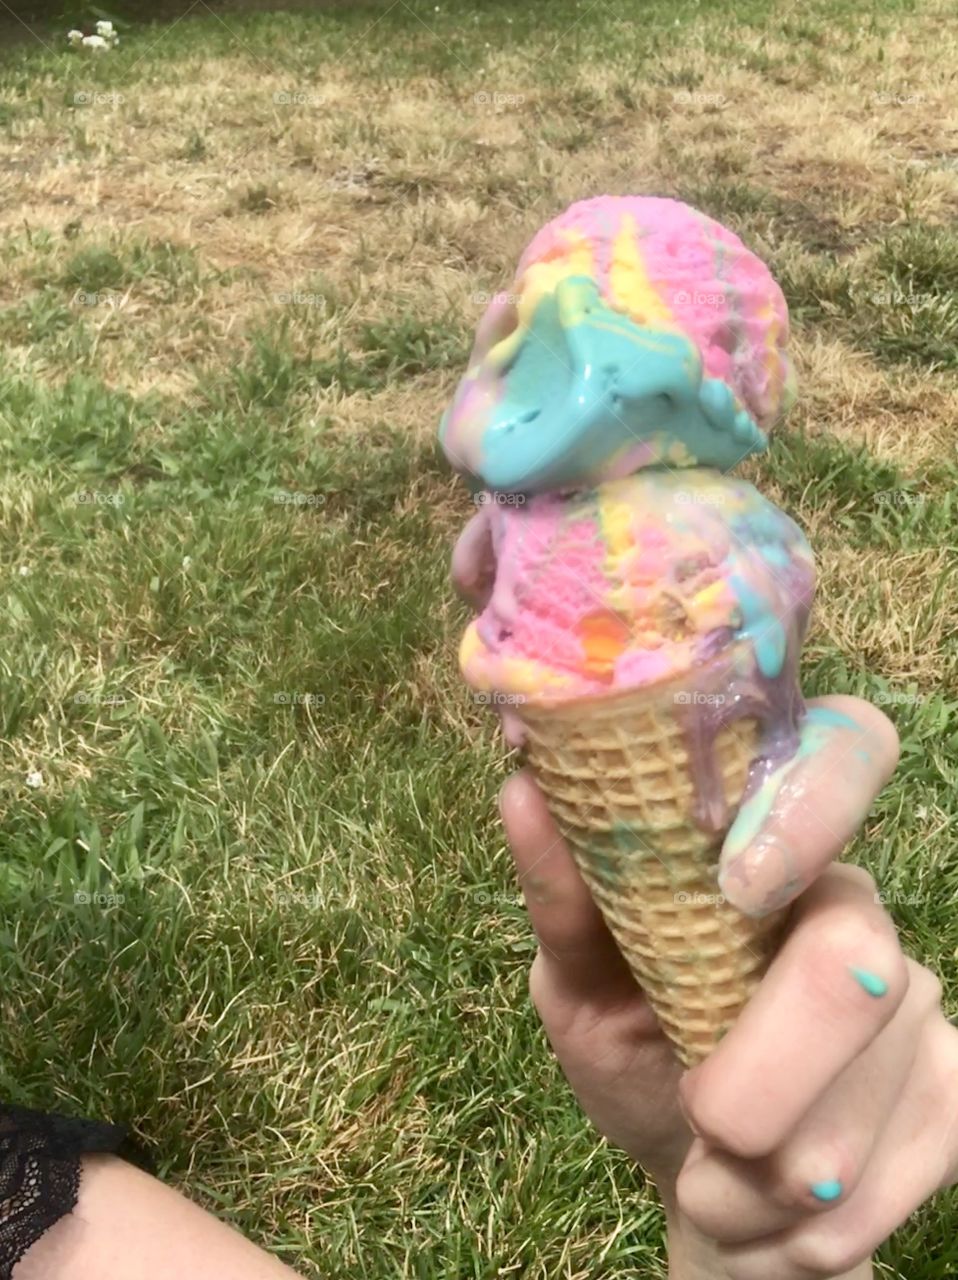 Holding a delicious rainbow colored ice cream and cone outdoors on a sunny day 